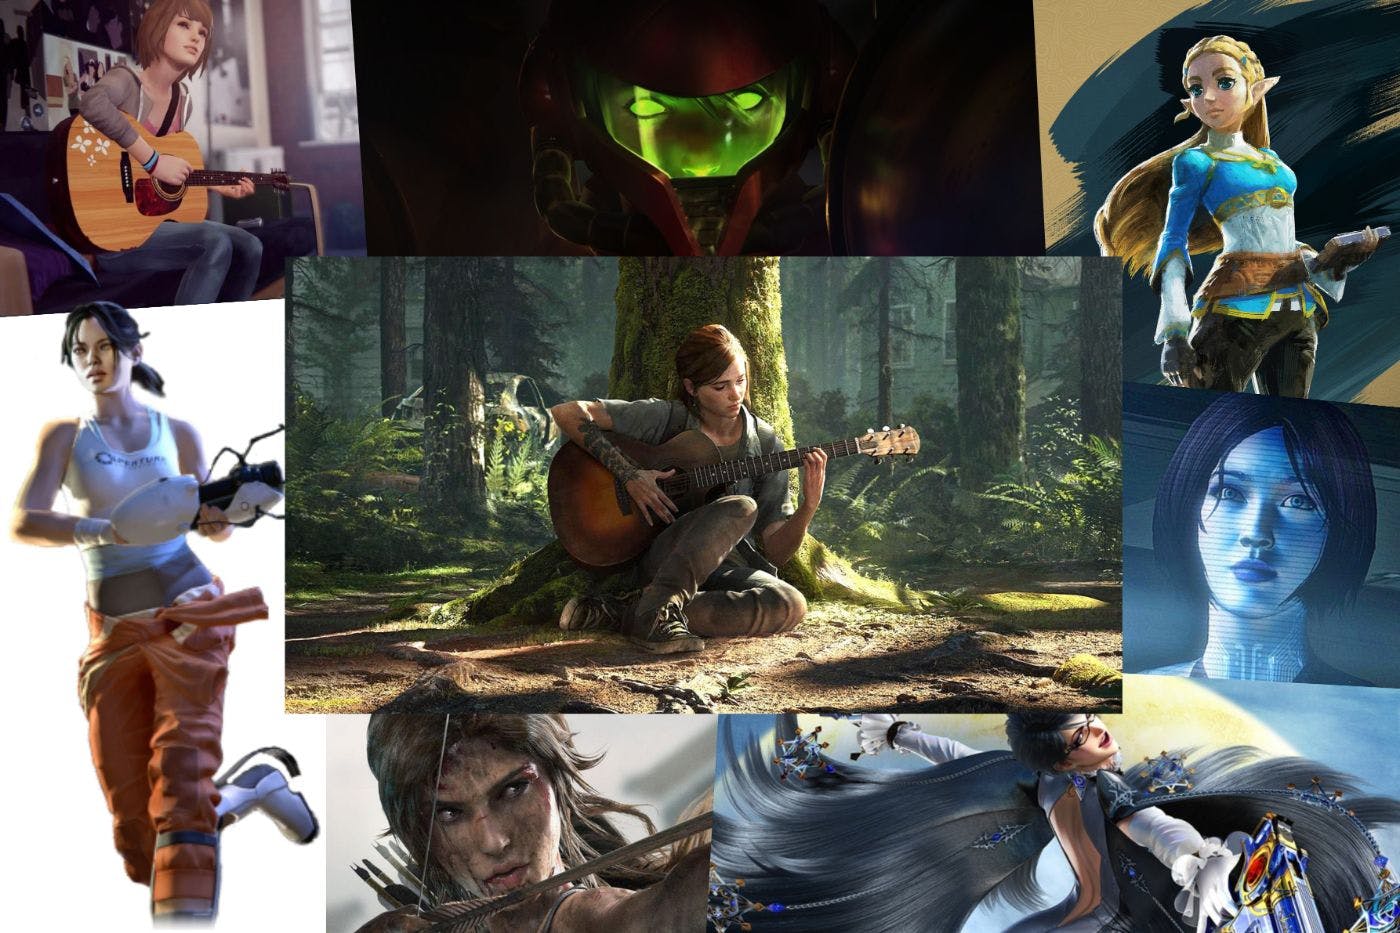 featured image - 10 Female Video Game Characters You Need to Know